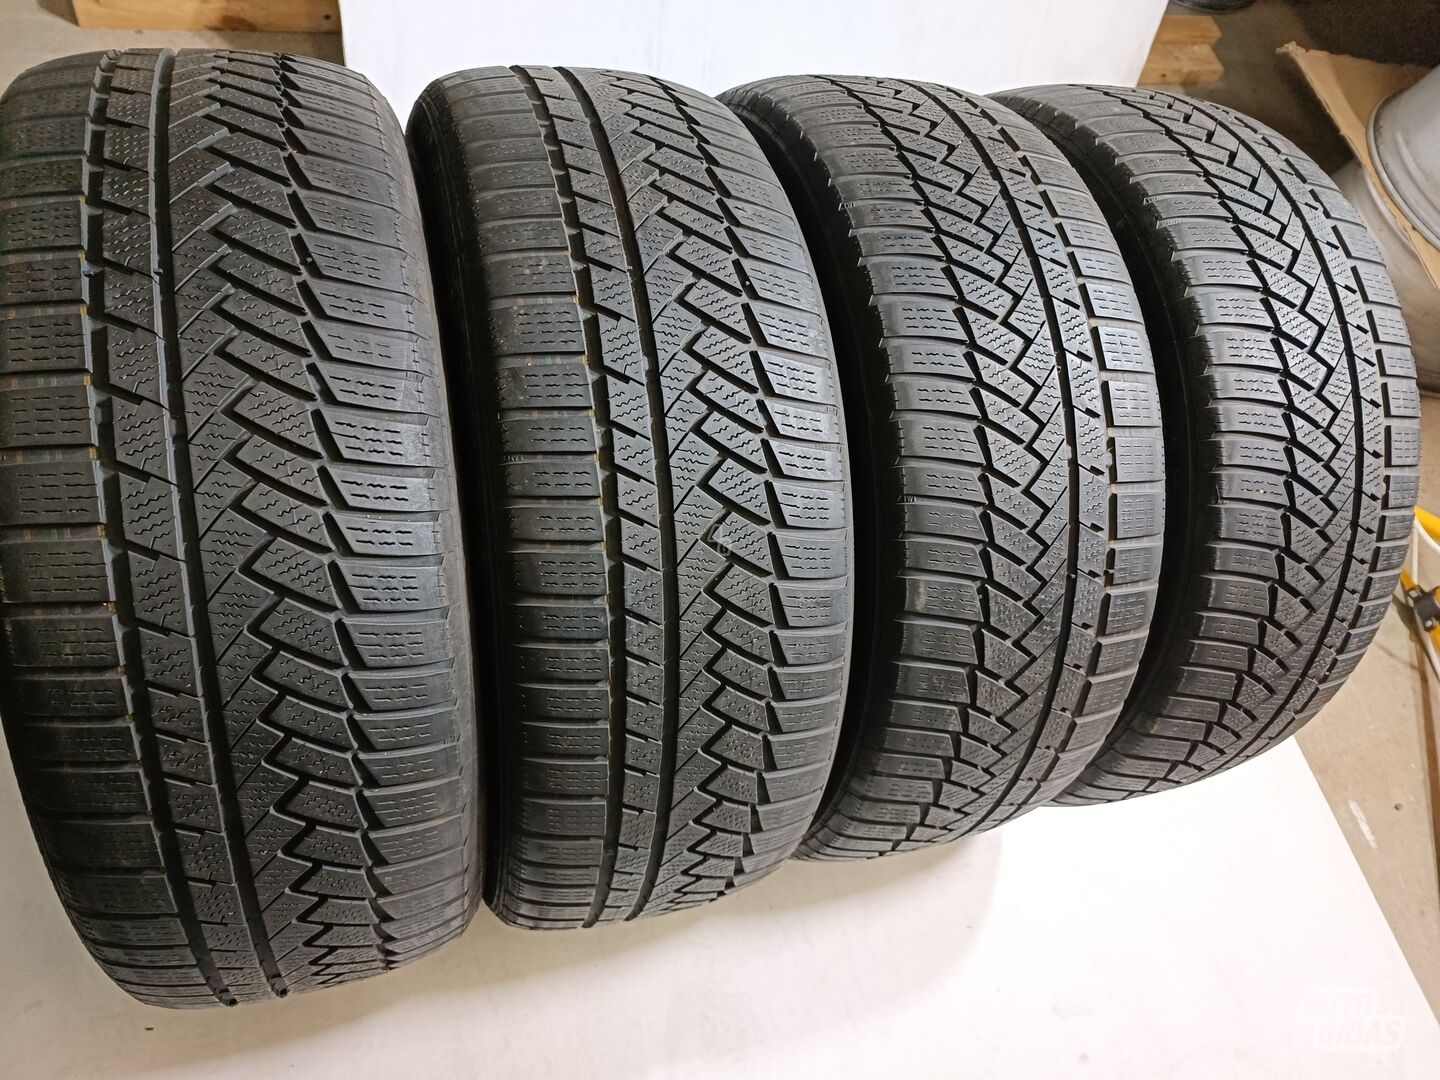 Continental 5mm R17 winter tyres passanger car